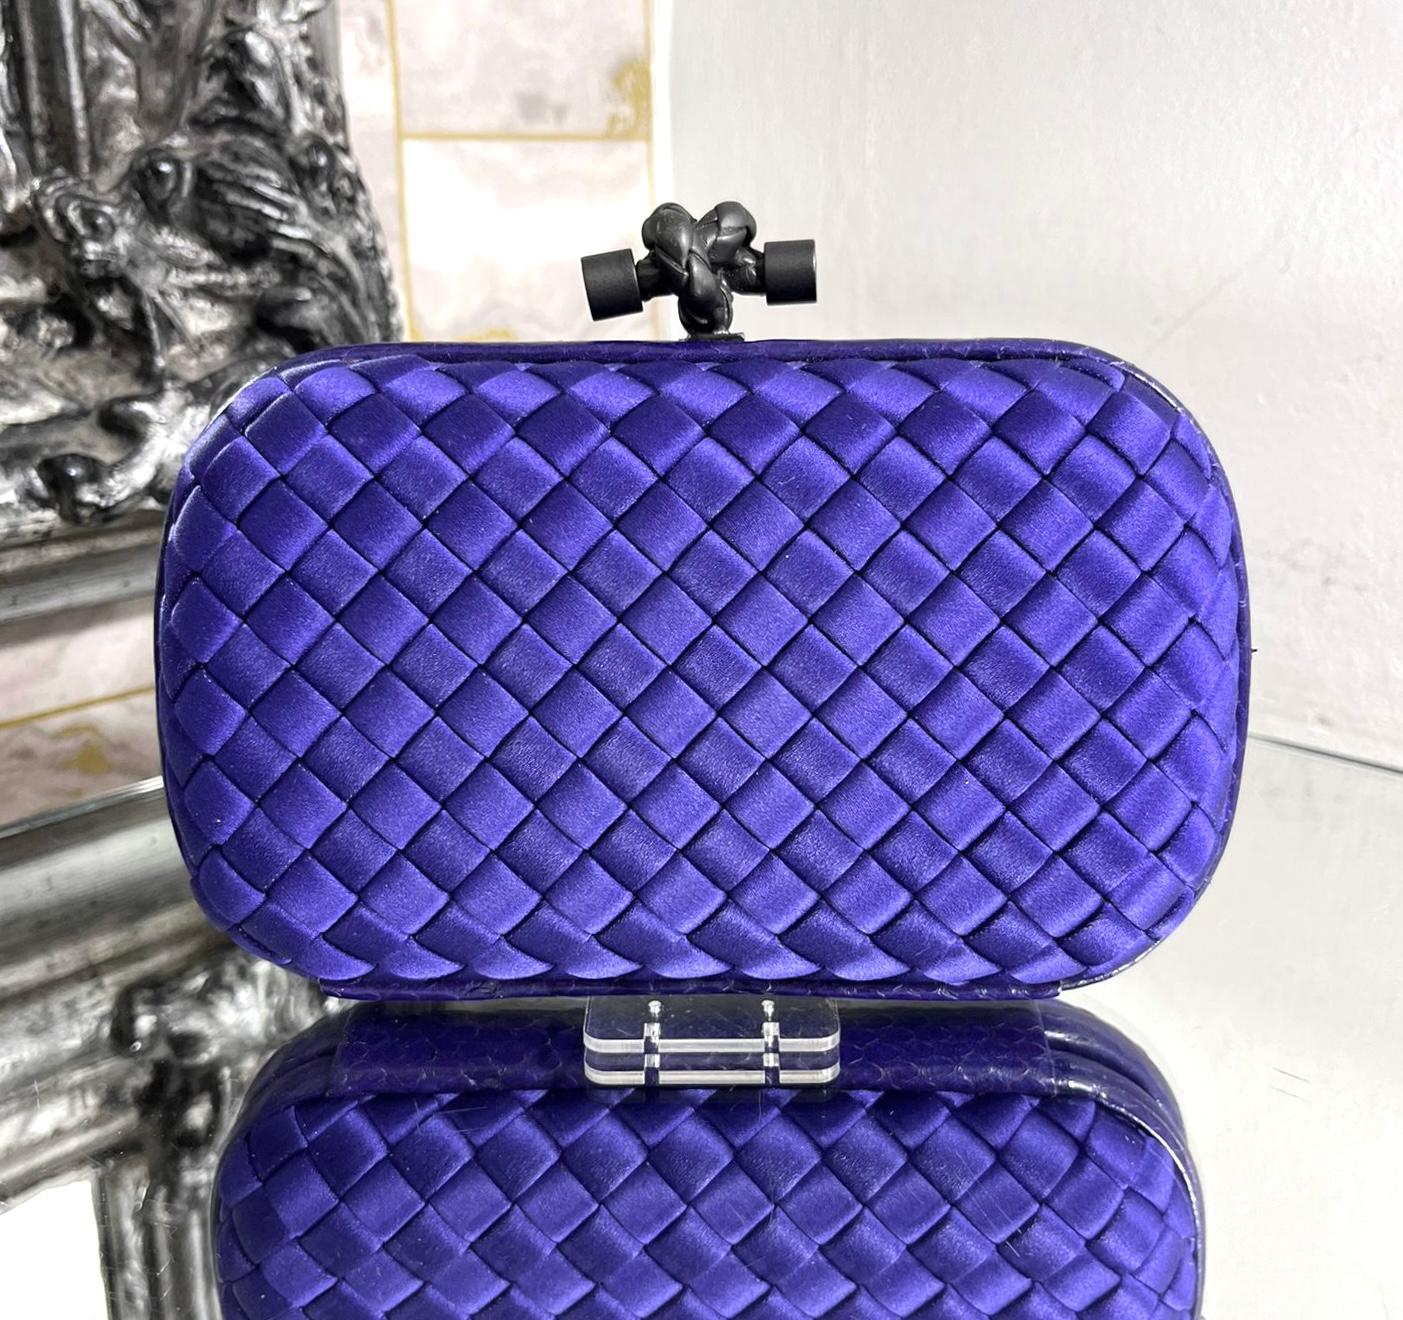 Bottega Veneta Satin & Snakeskin Trim Top Knot Clutch Bag

Structured, dark violet bag designed with the brand's signature Intrecciato weave.

Featuring black palladium knot twisted closure and tonal snakeskin trimming.

Size – Height 10cm, Width